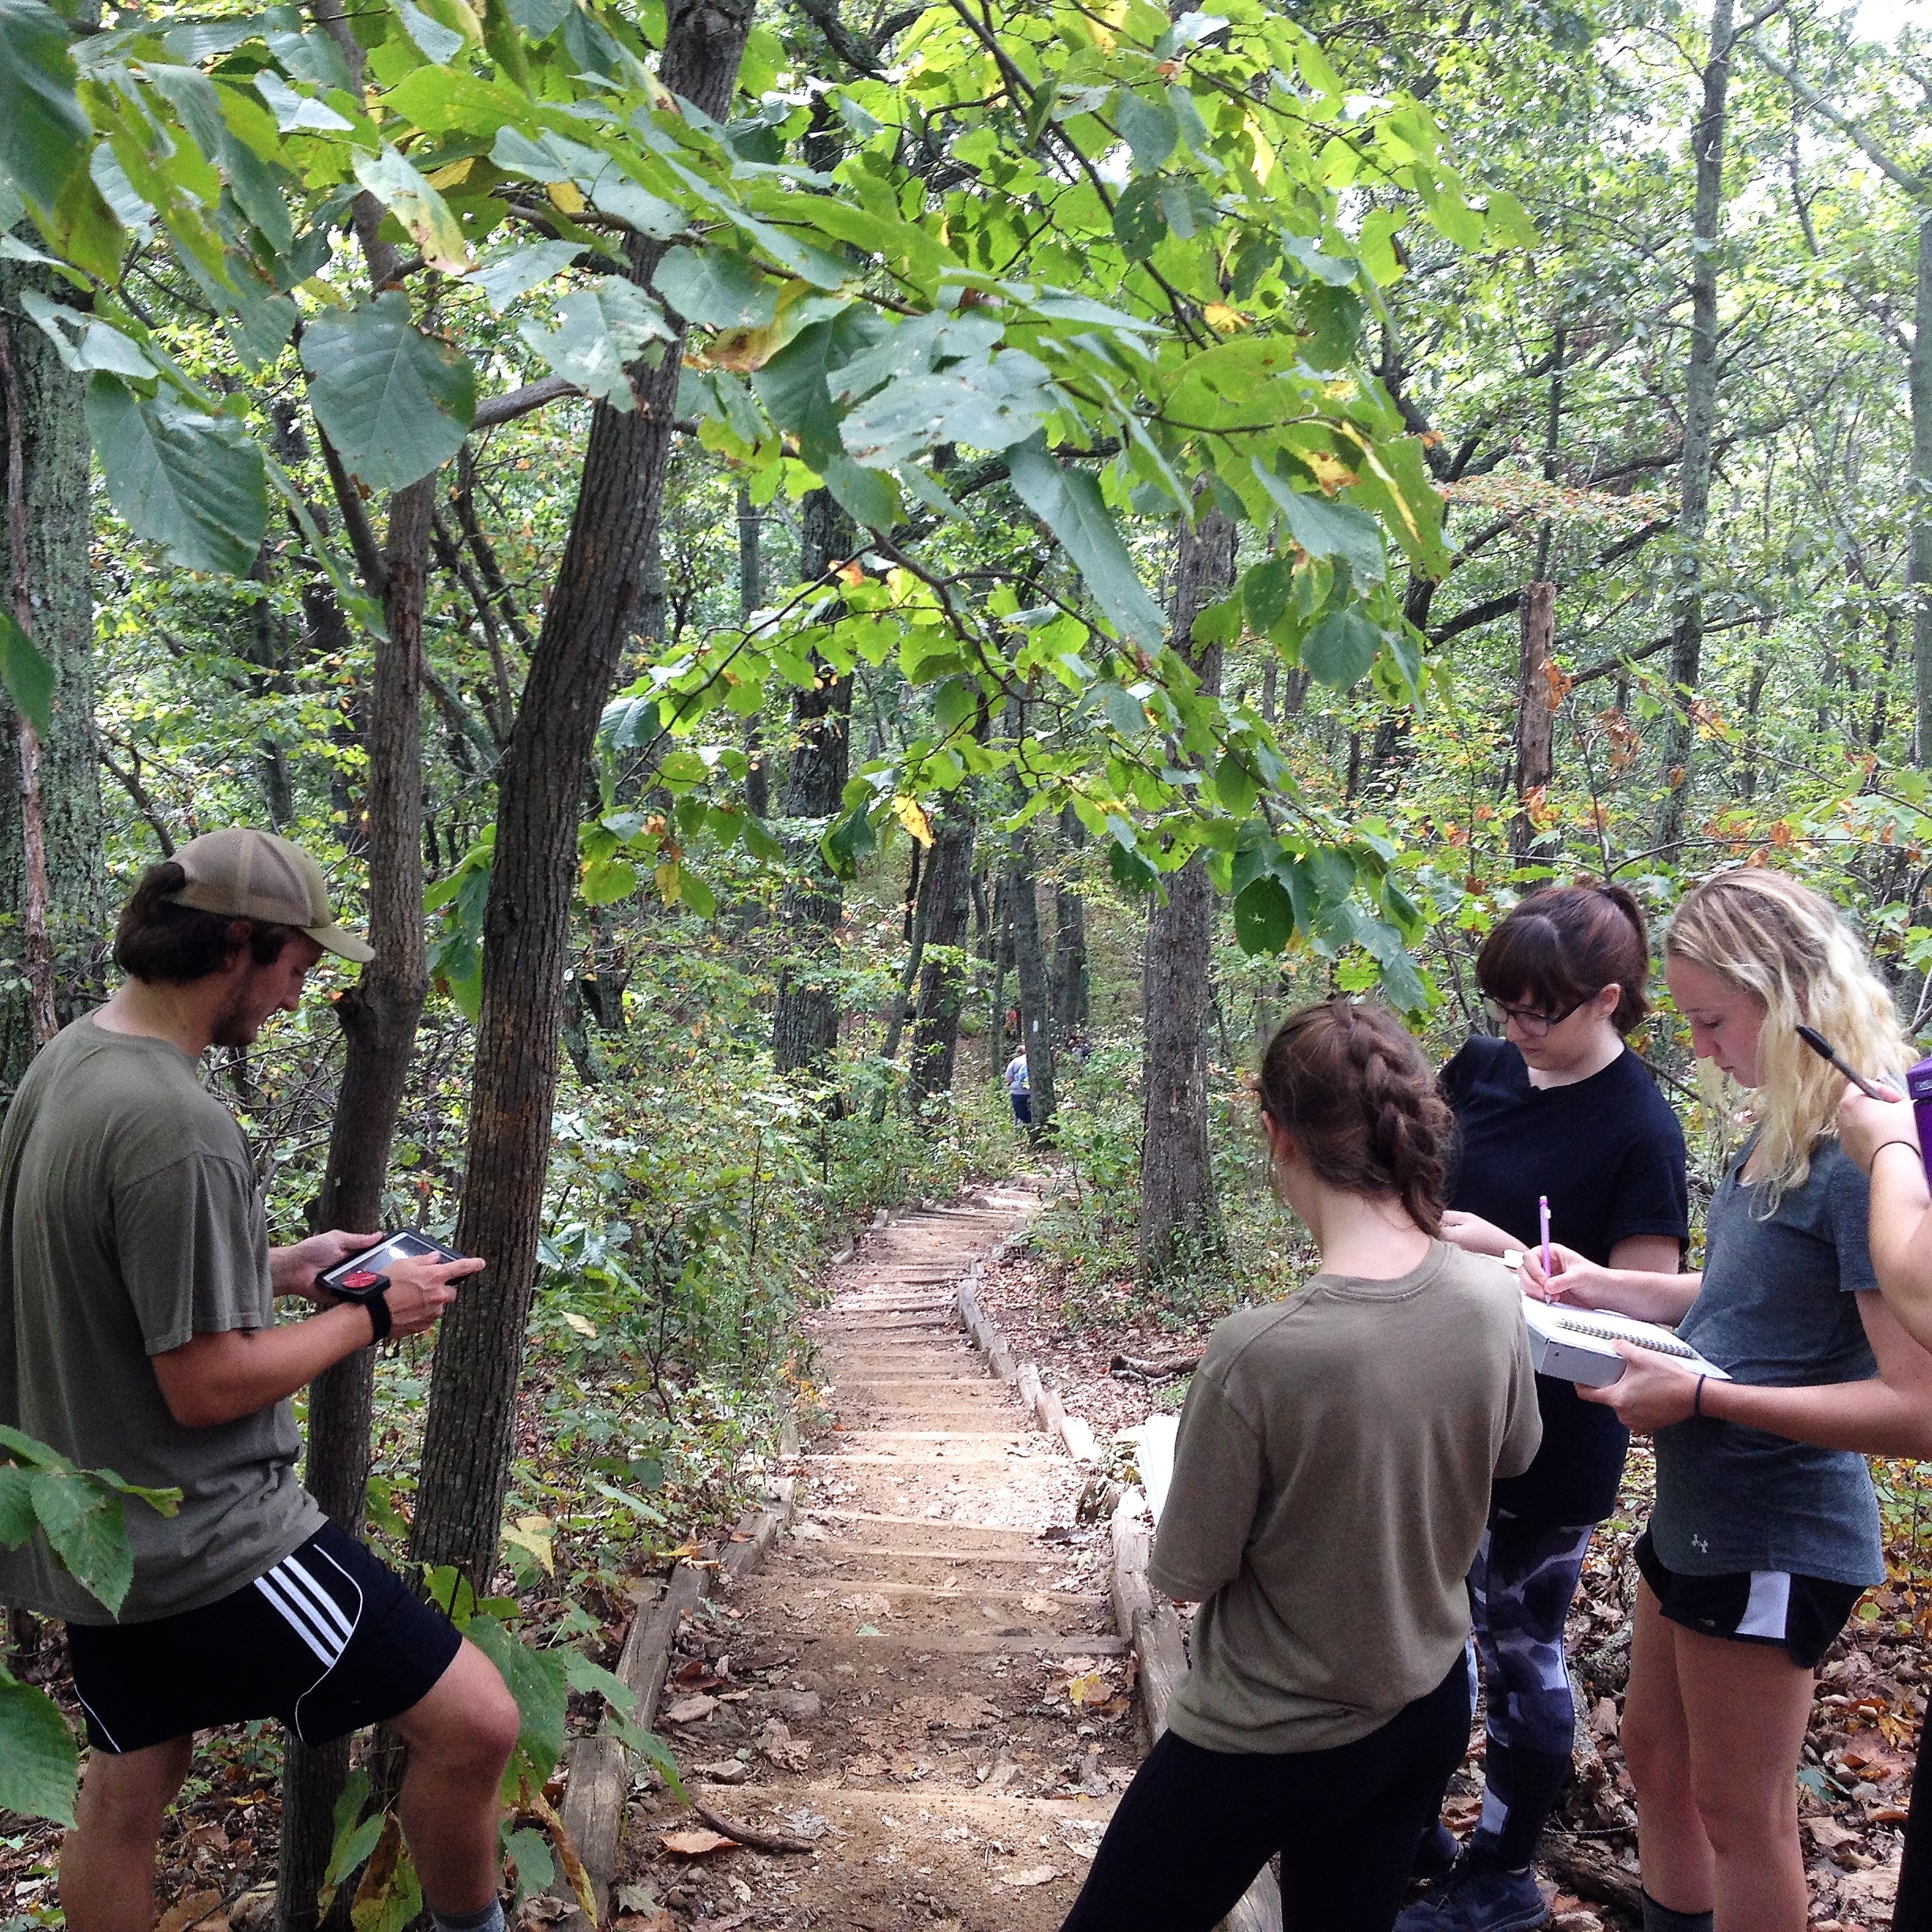 Students taking notes on the fauna found on the hiking trail